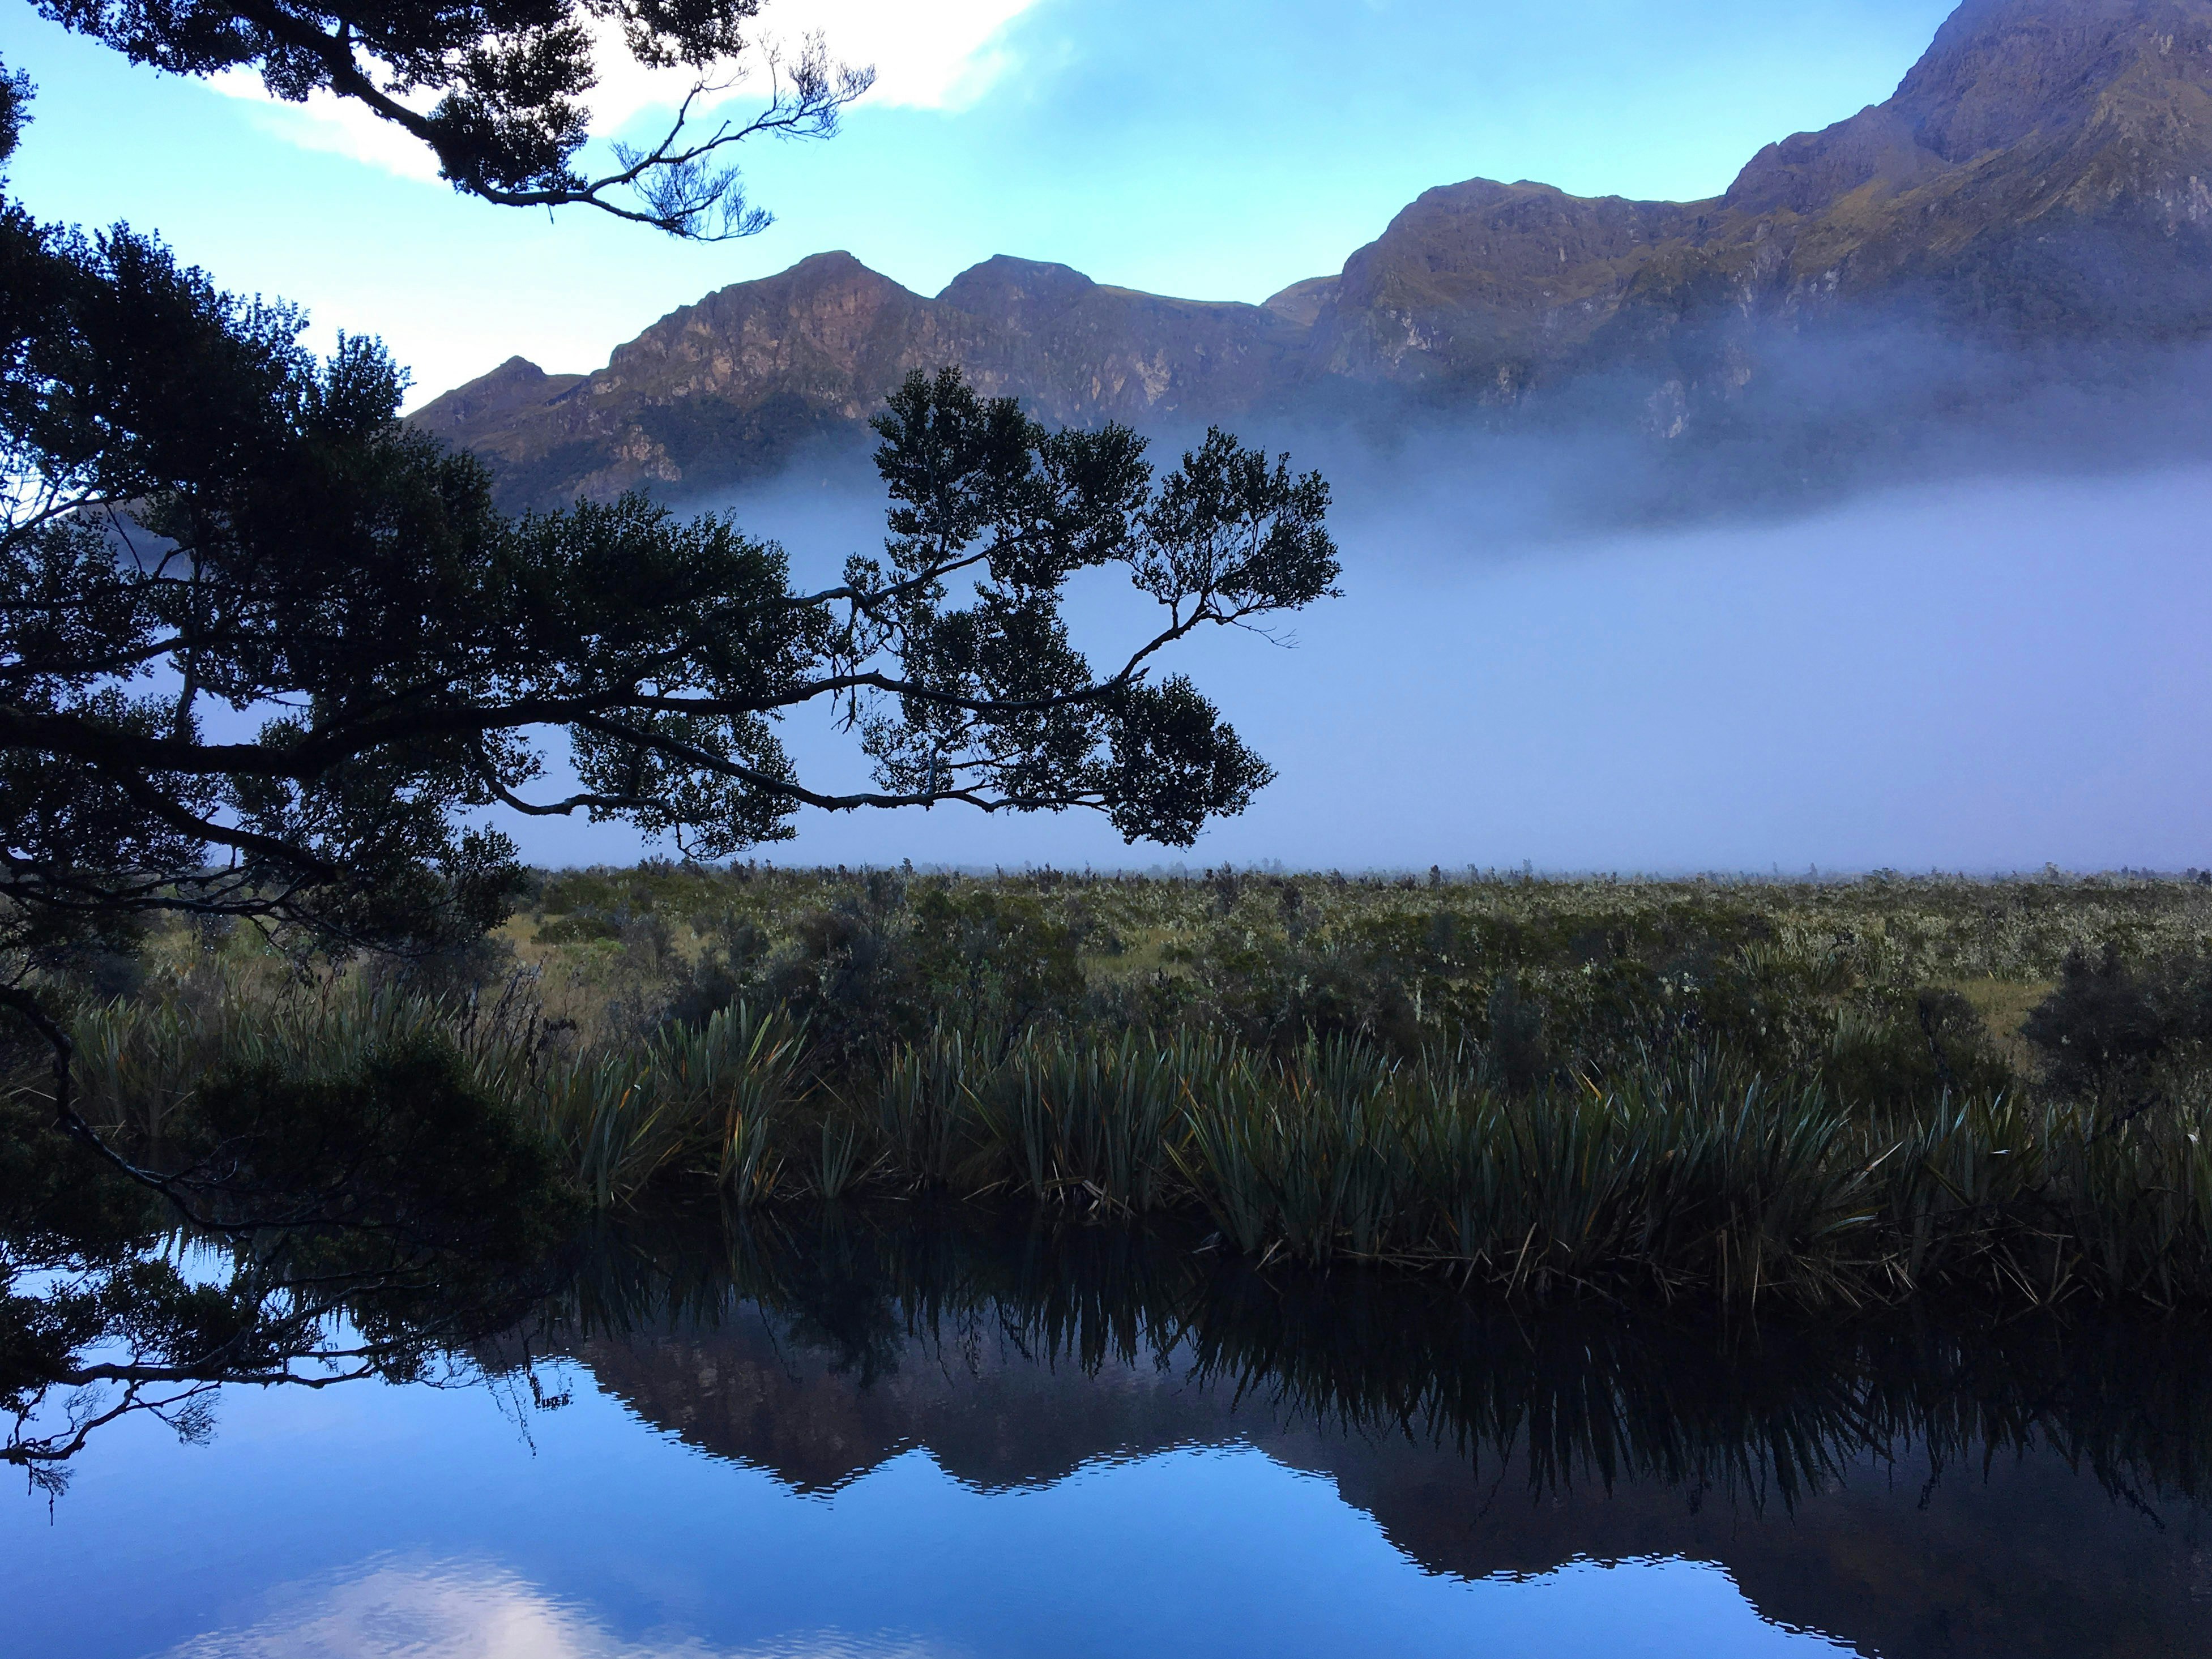 Foggy nature background in Te Anau, Southland, New Zealand.